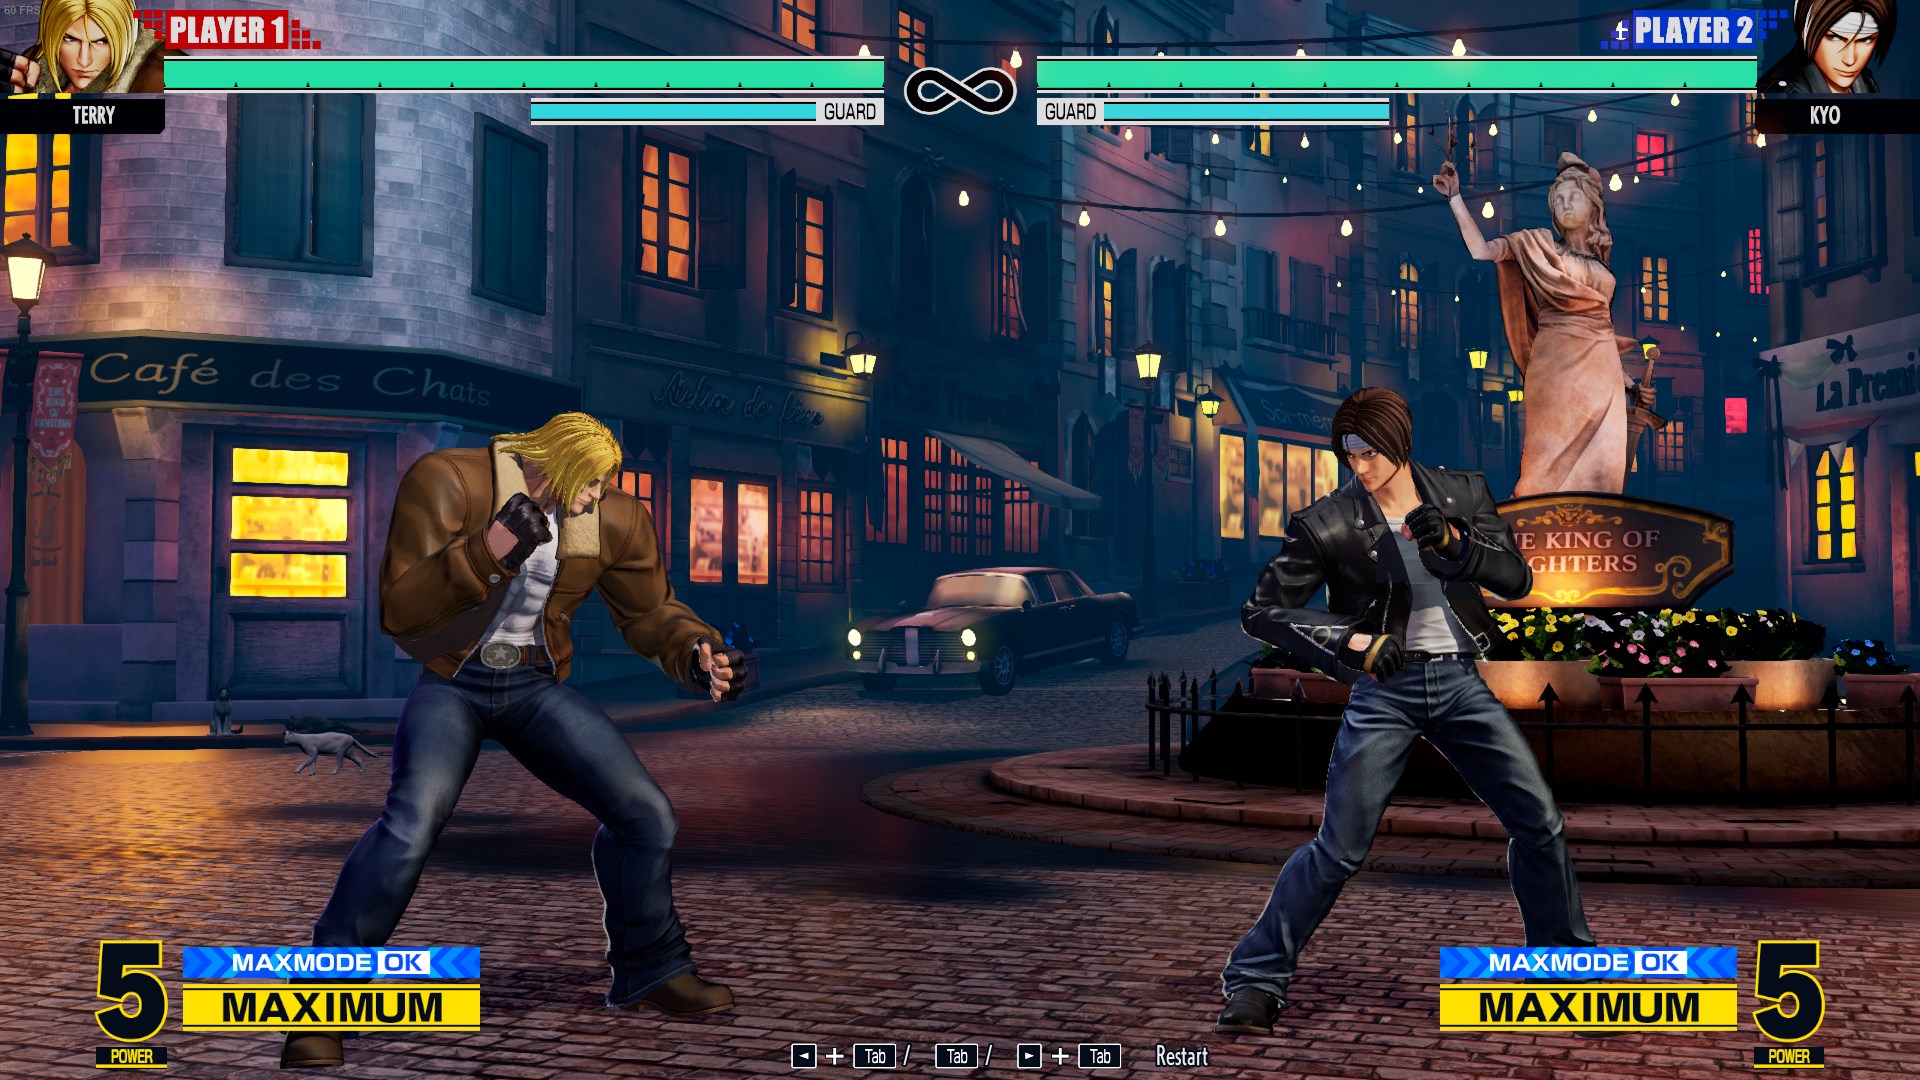 King of Fighters Review and Analysis – November 2020